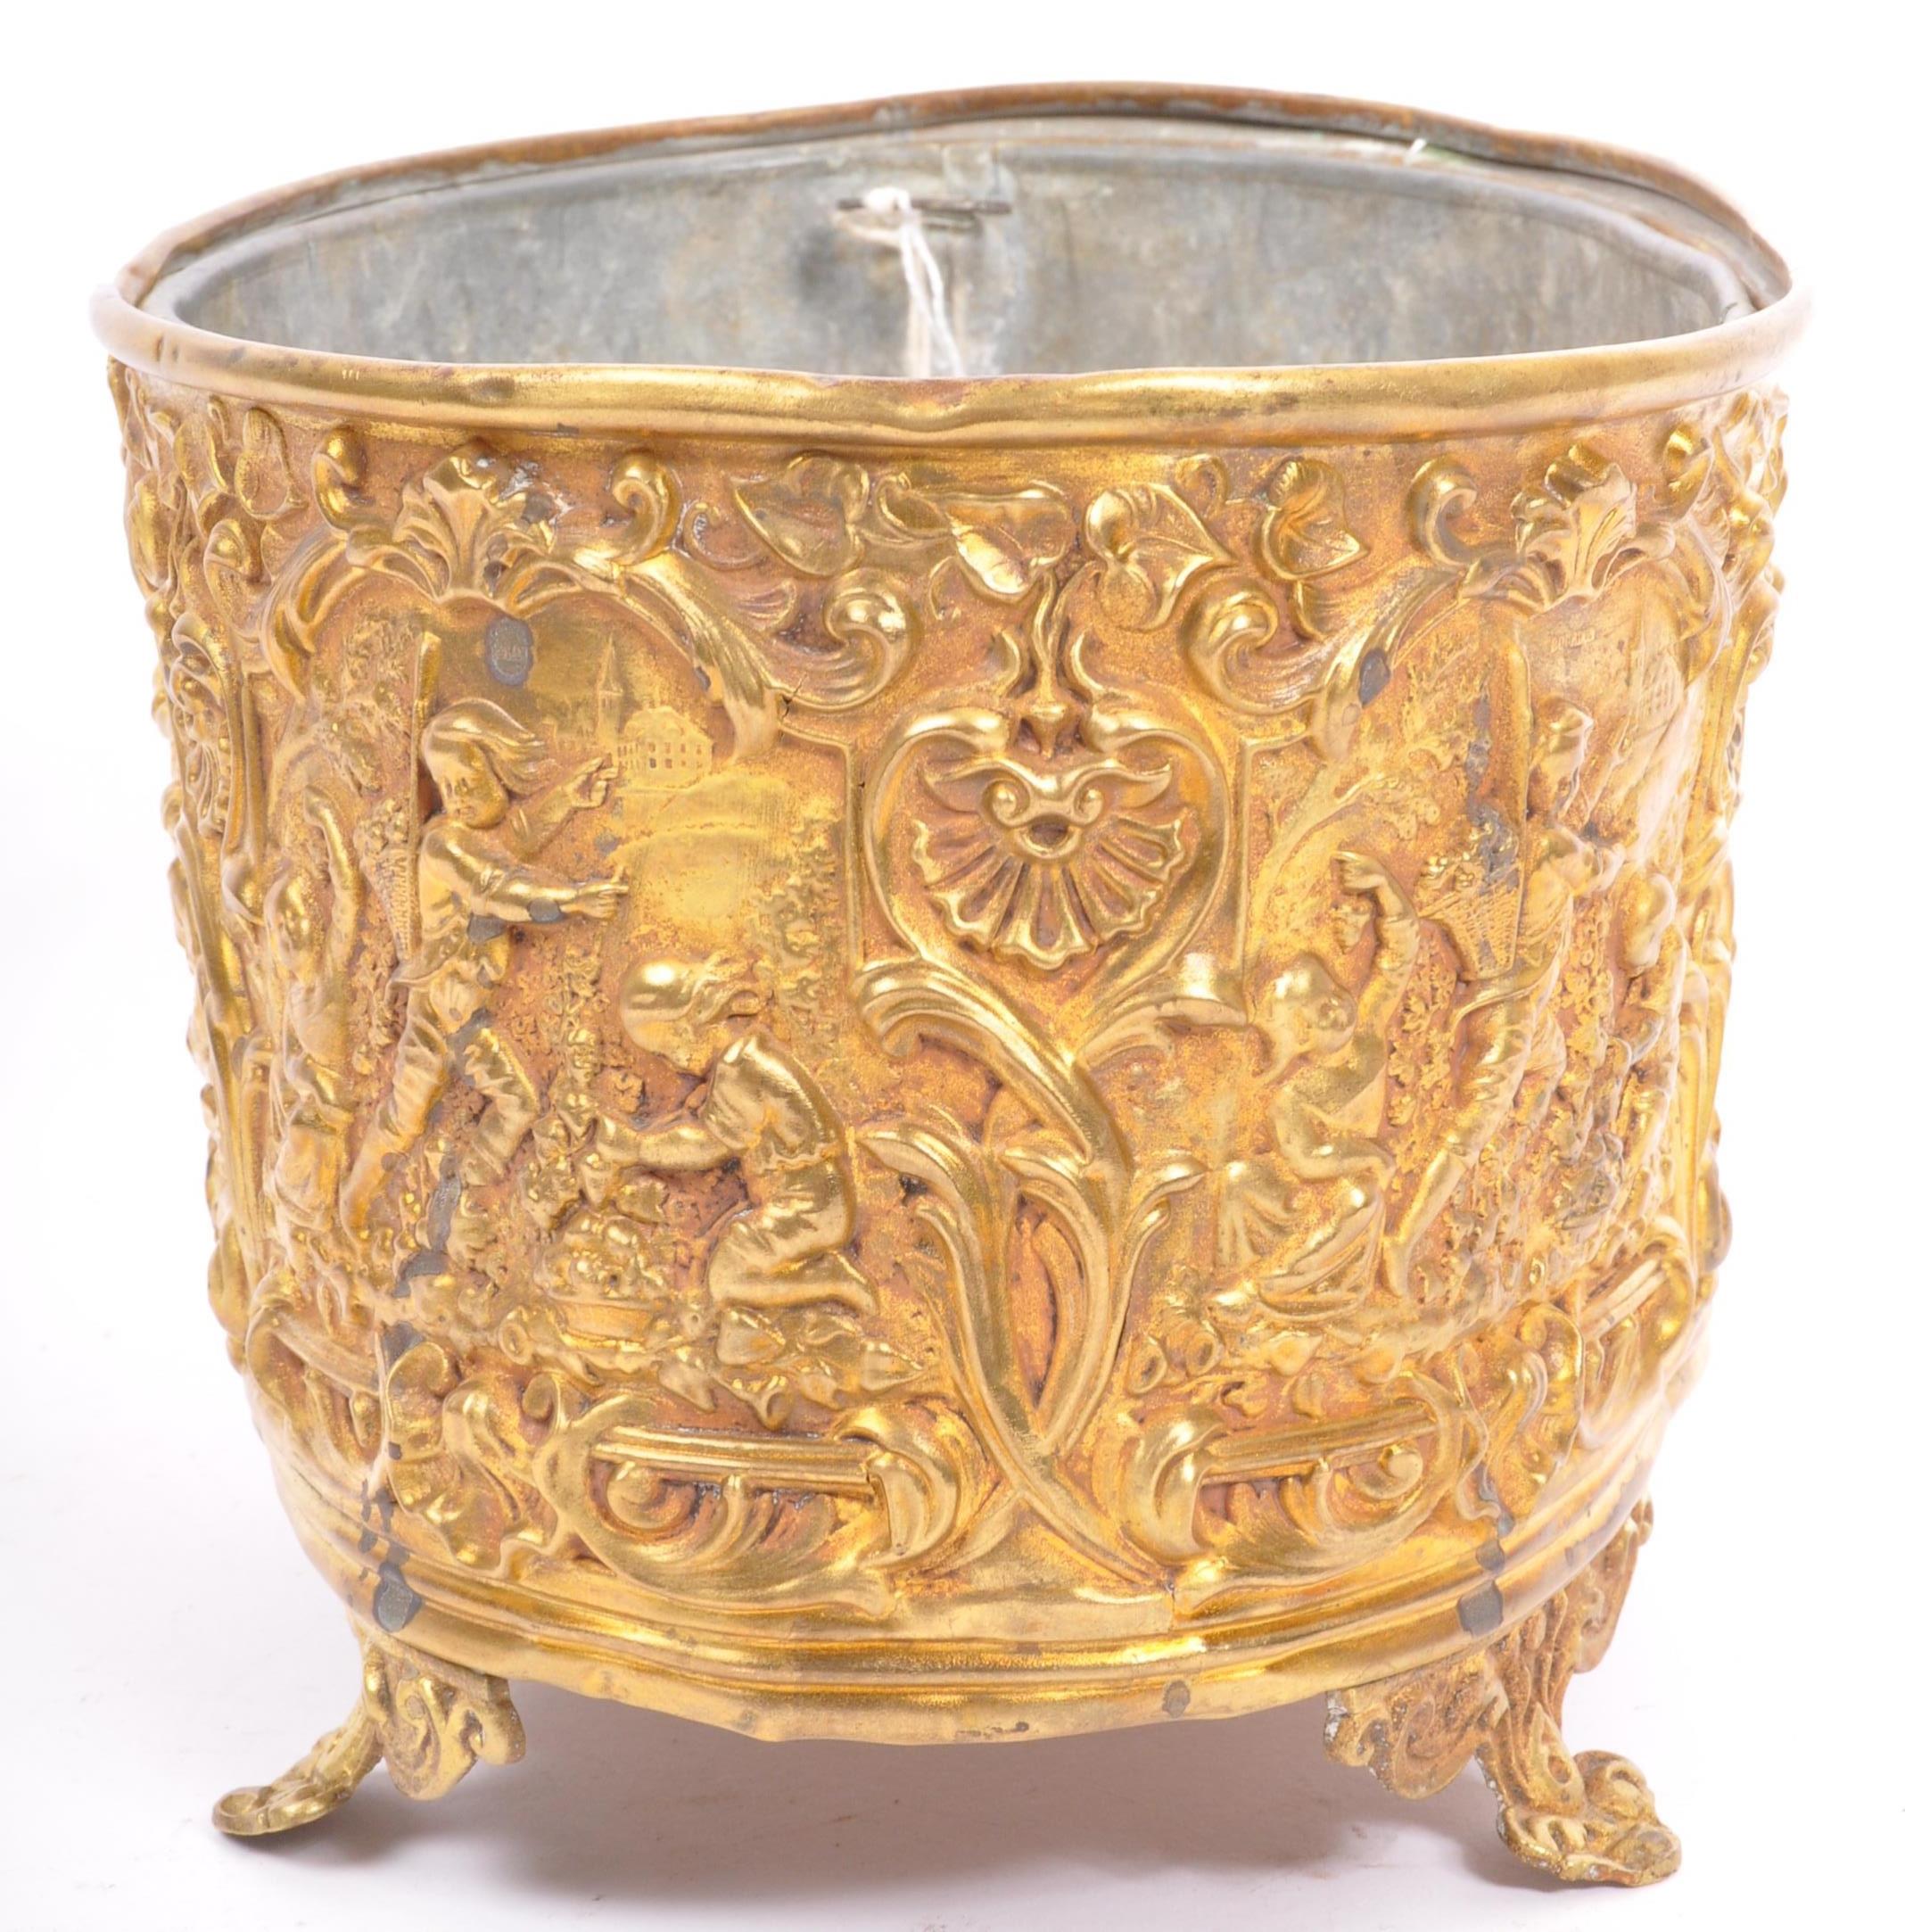 19TH CENTURY FRENCH REPOUSSE BRASS BOURDON PLANTER - Image 2 of 7